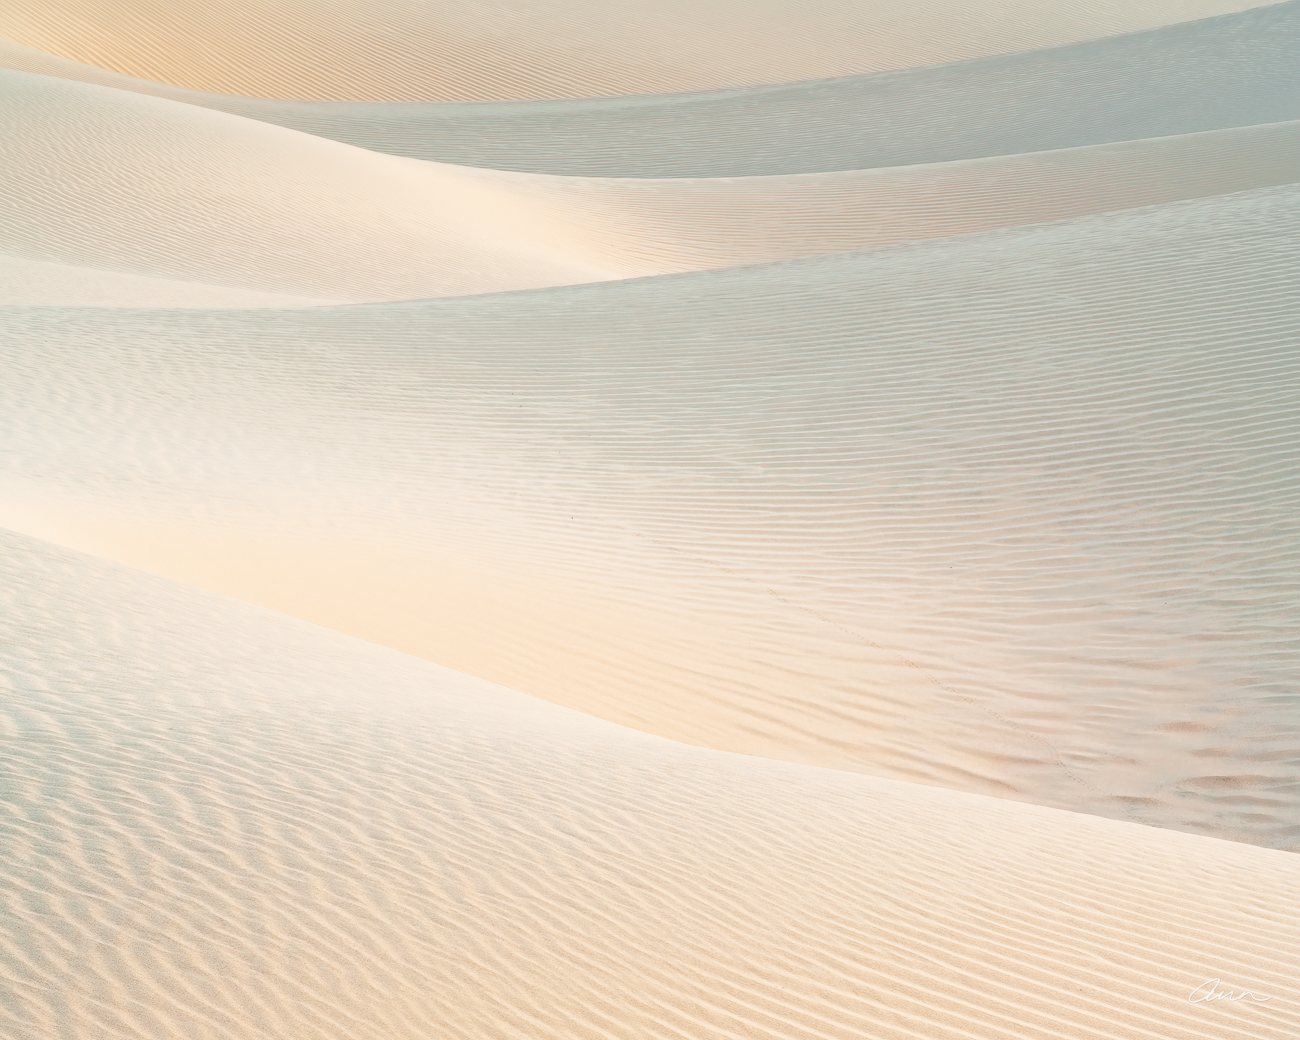 Sand dune layers look like silky tousled sheets.